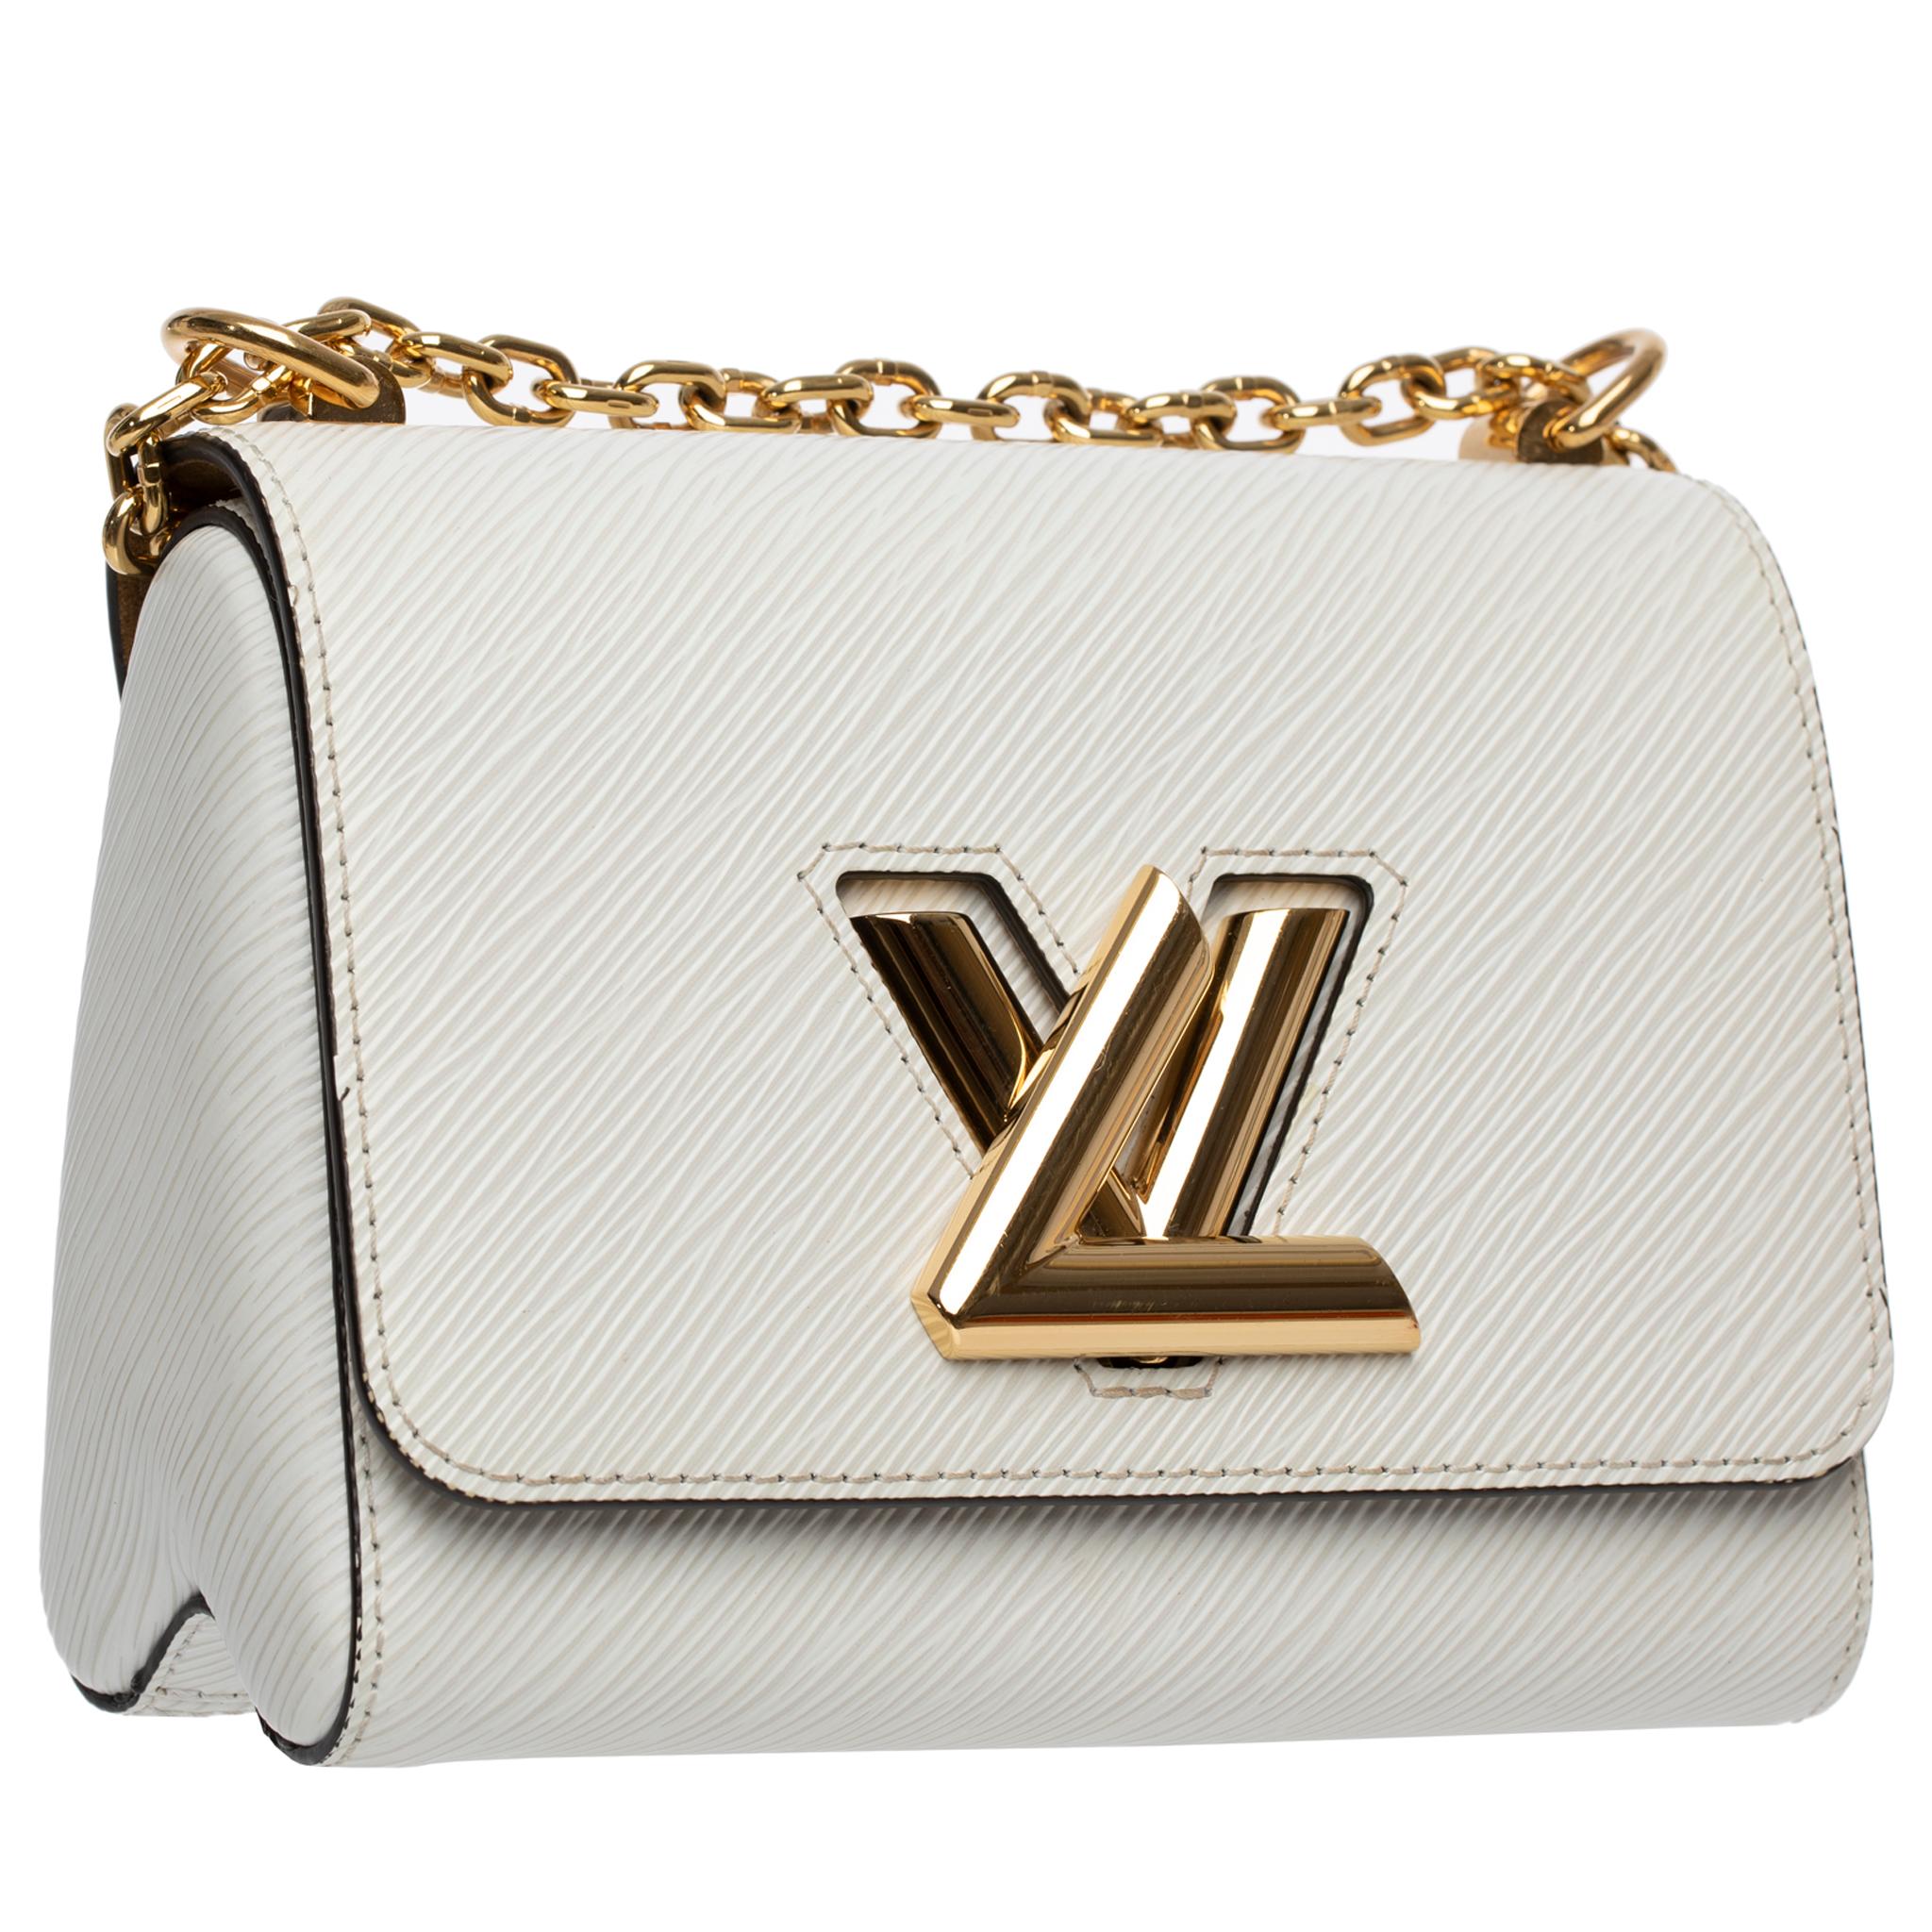 Louis Vuitton Twist Shoulder Bag Ivory Epi Leather Gold Tone Hardware In Excellent Condition For Sale In DOUBLE BAY, NSW